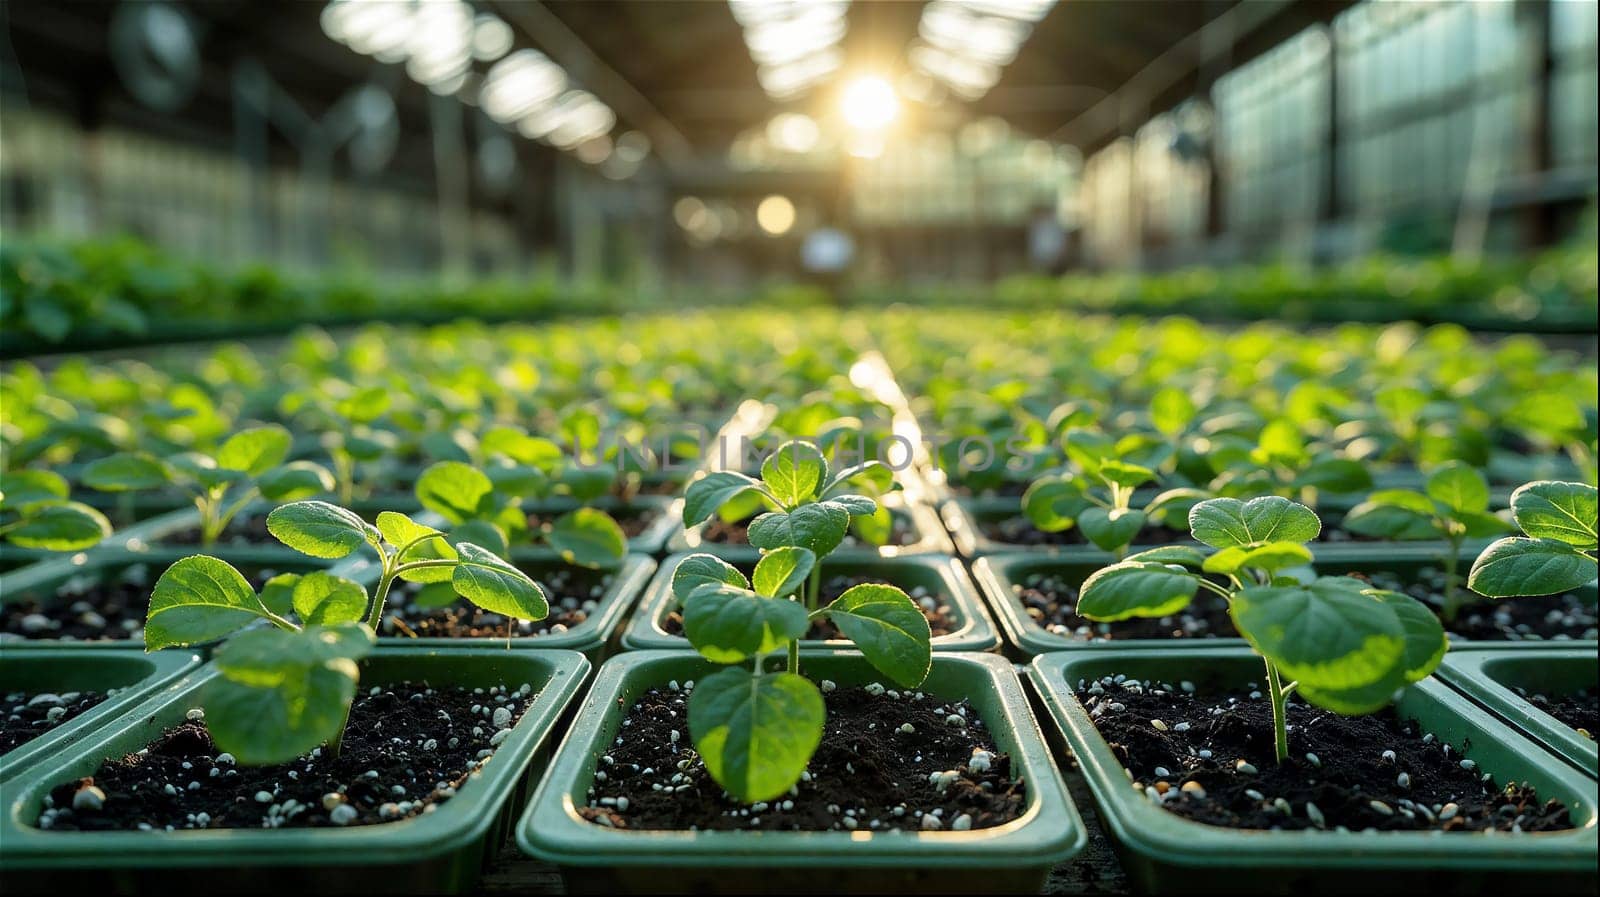 Young plants growing in trays on tables inside a modern greenhouse